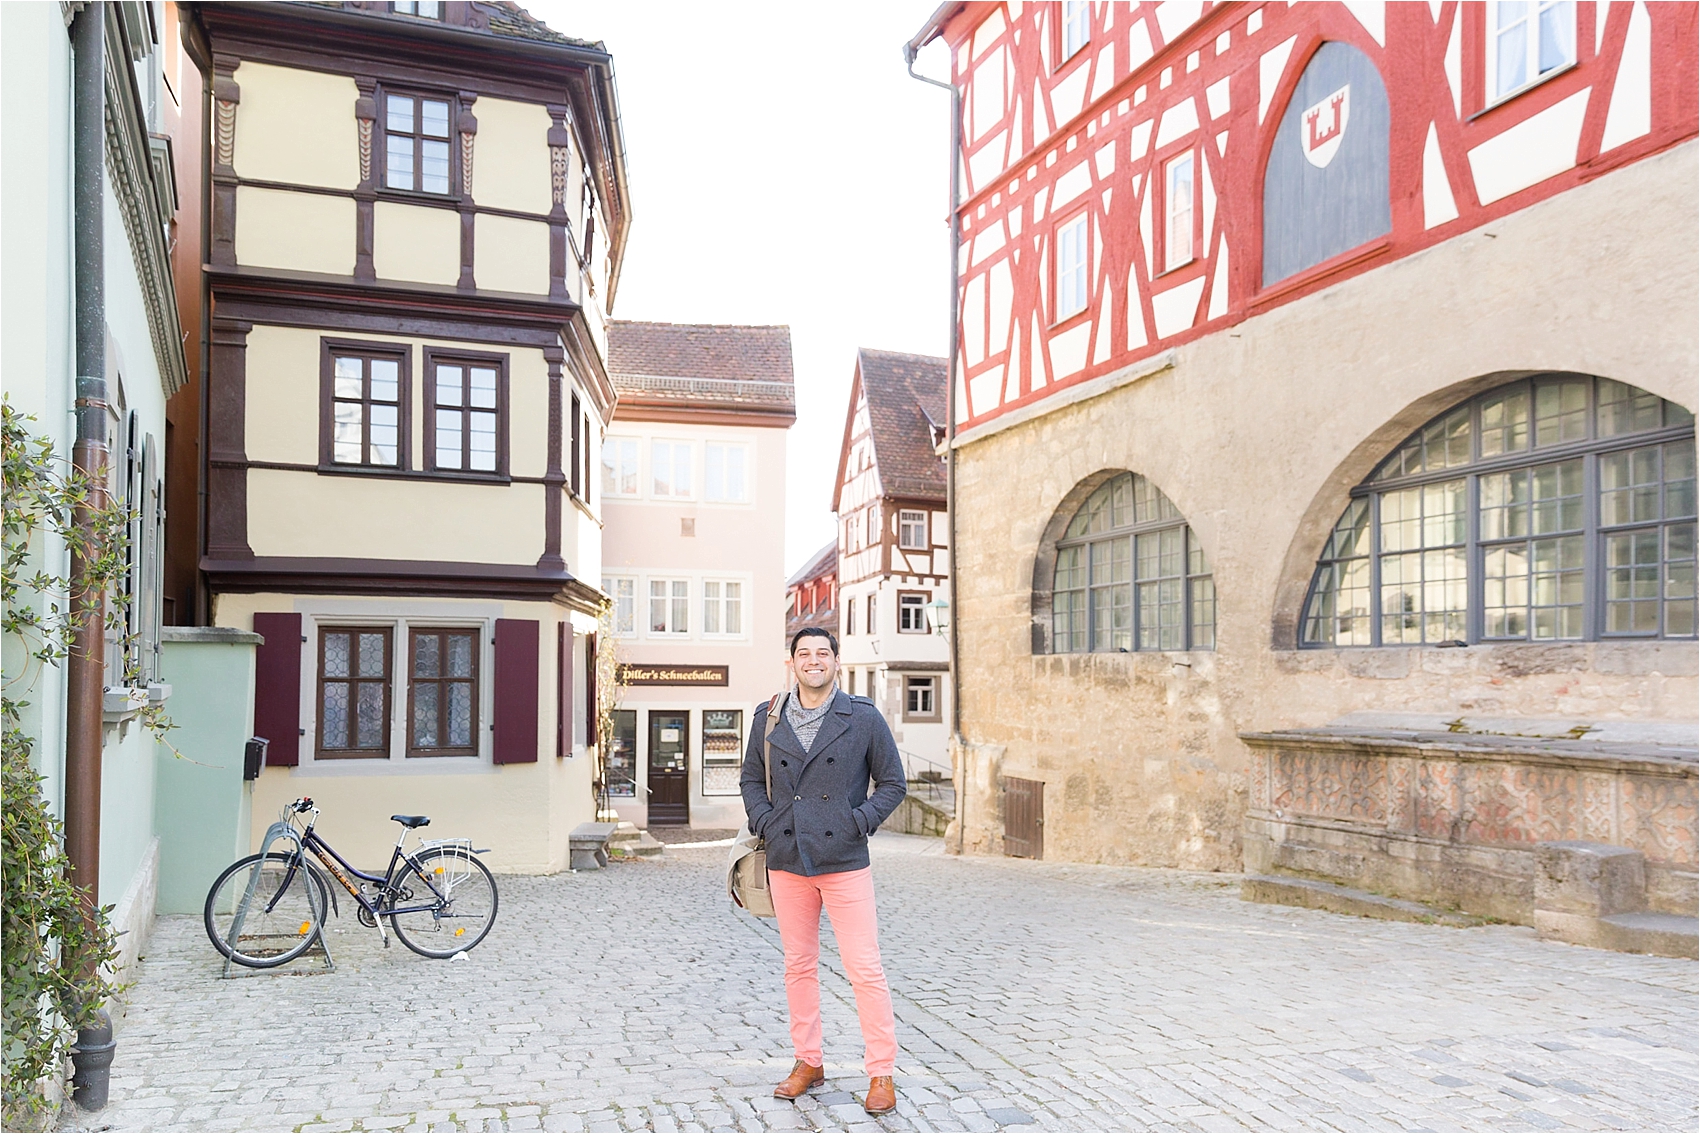 Rothenberg, Germany - A Real Life Fairytale Storybook Town